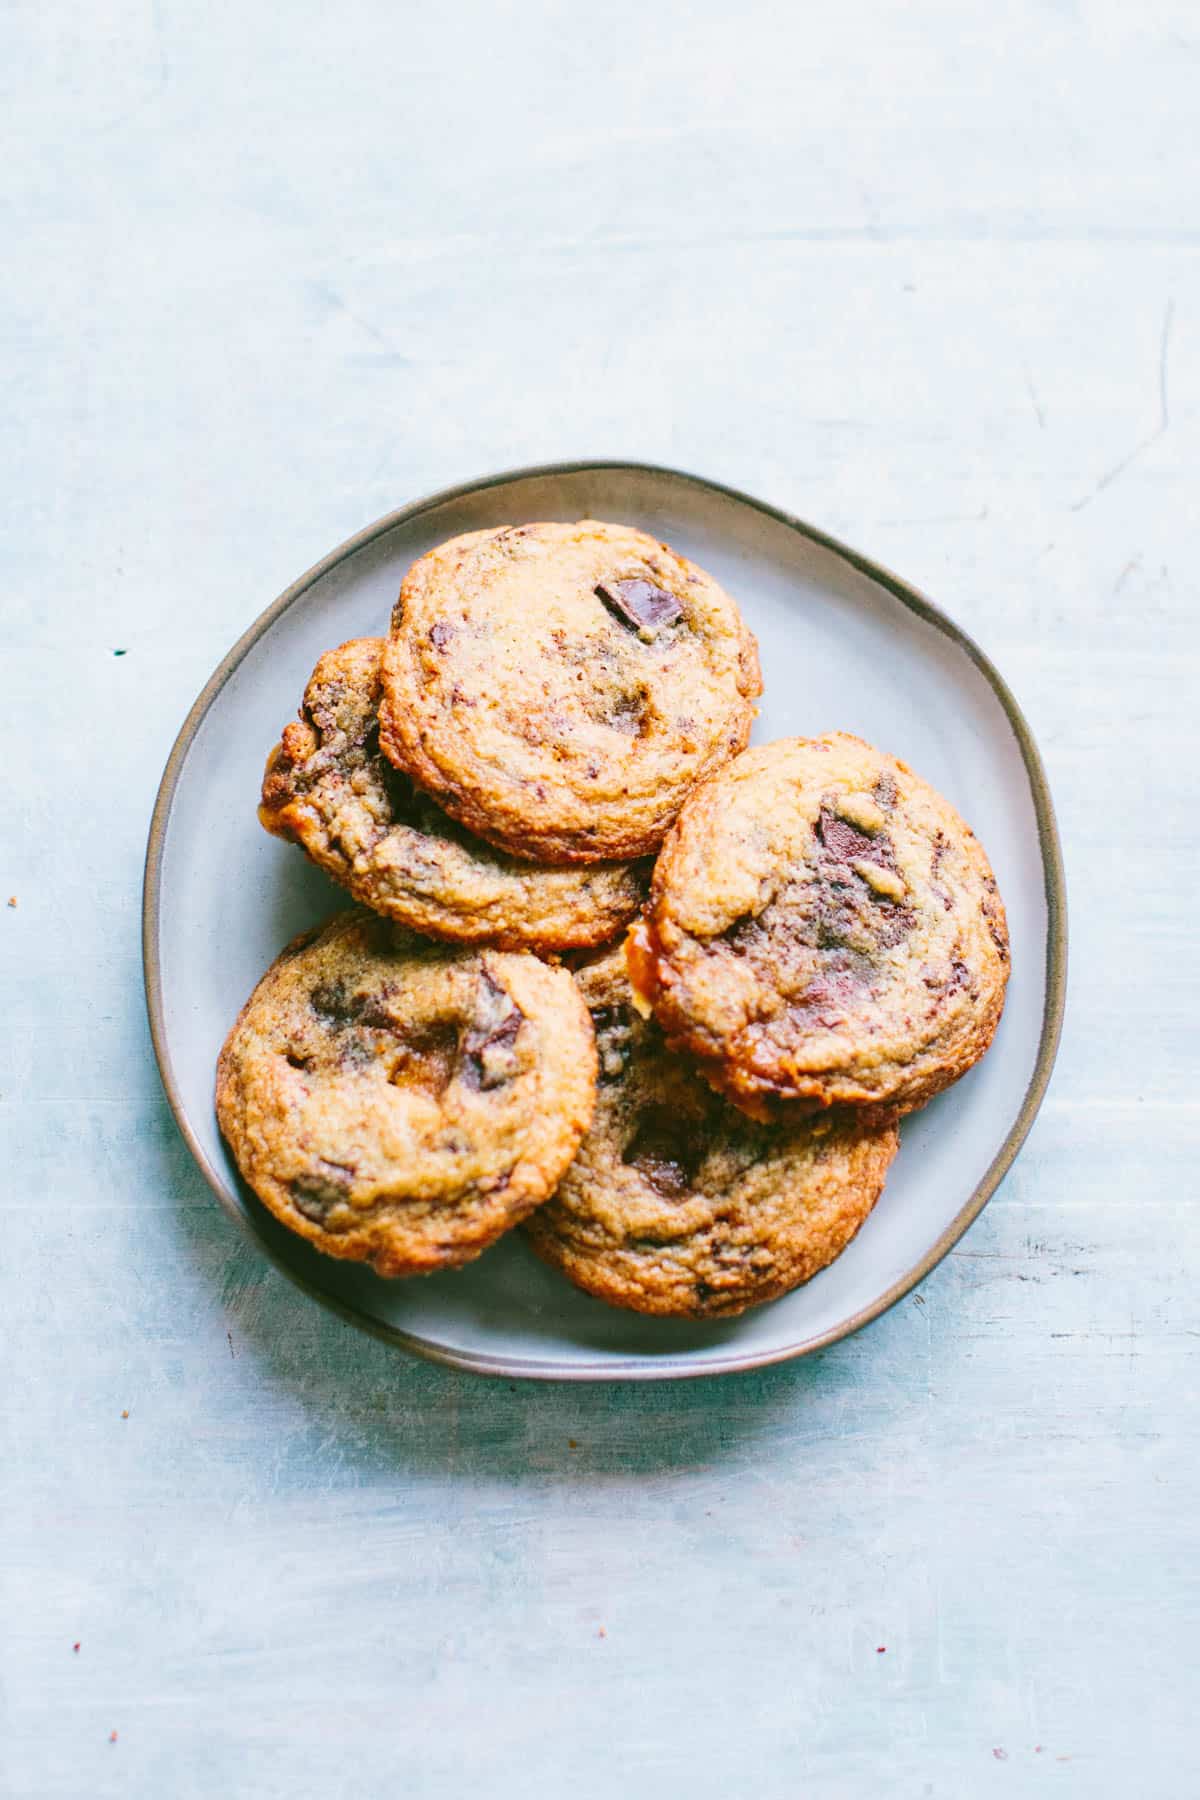 A plate of chocolate chip cookies